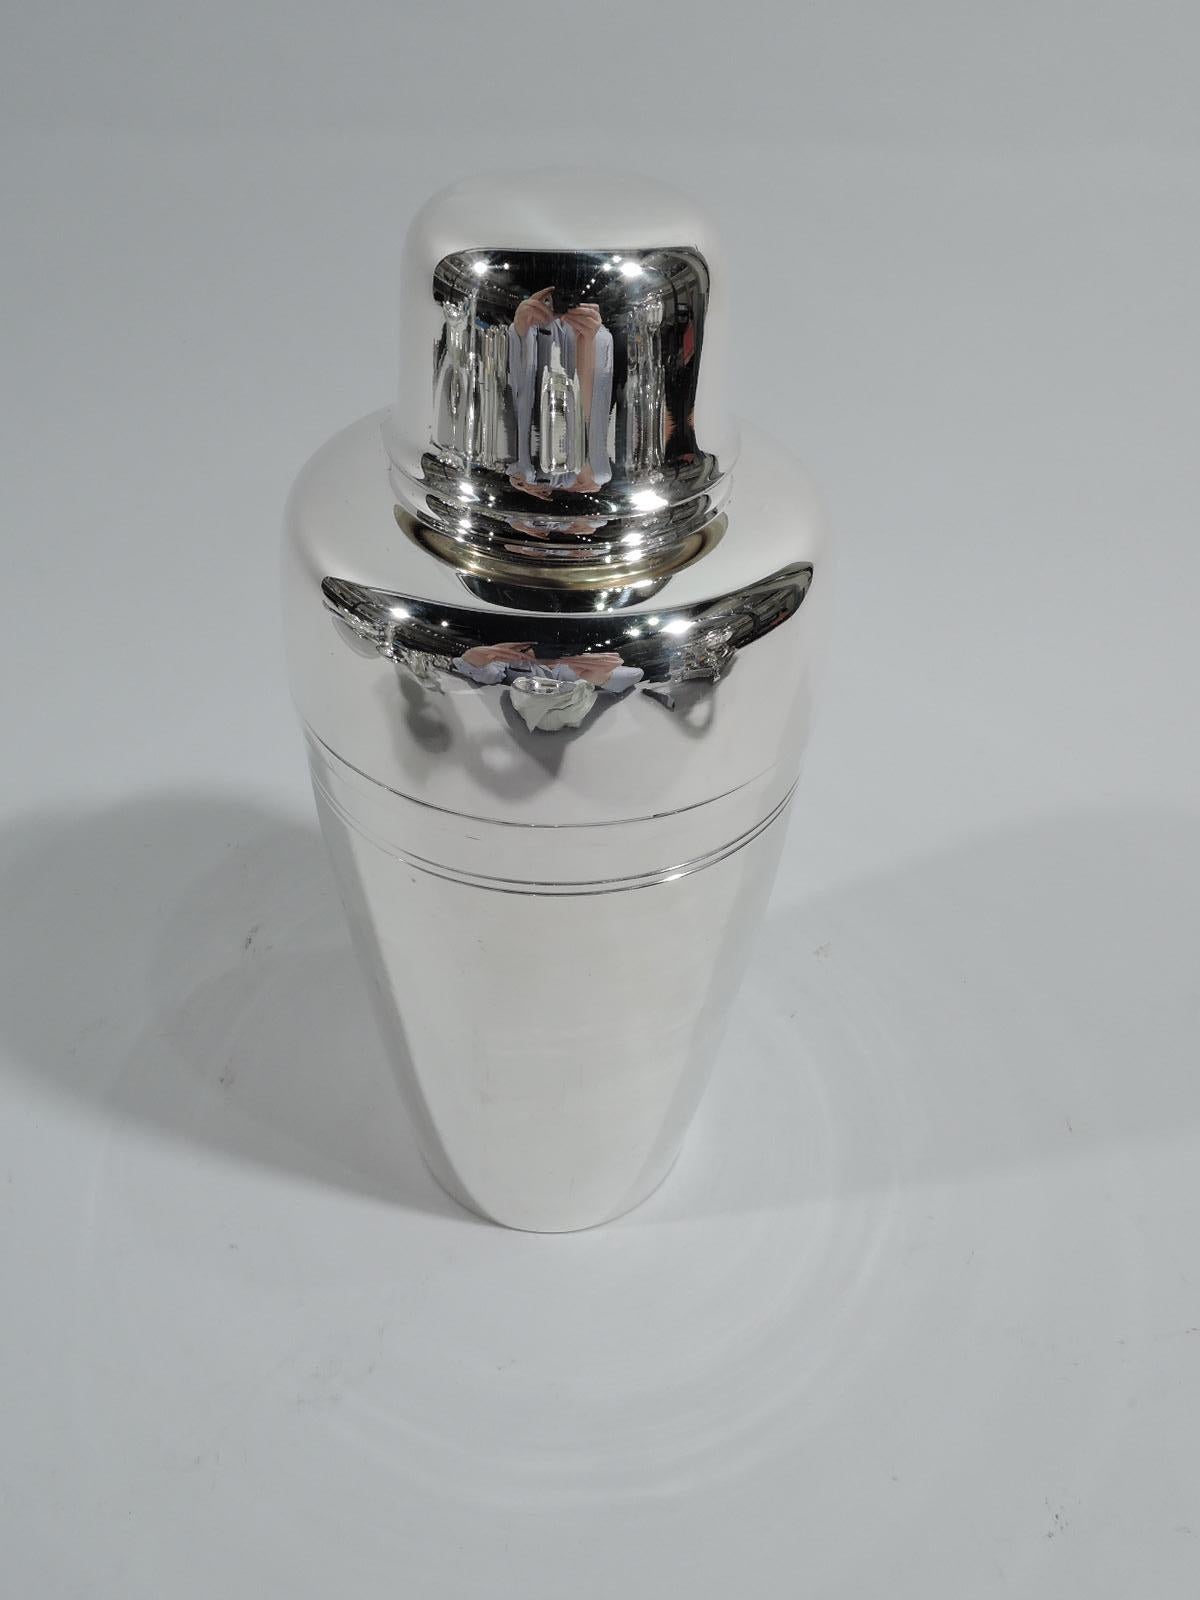 Mid-Century Modern sterling silver cocktail shaker. Made by Tiffany & Co. in New York. The classic bullet form with tapering cup, curved shoulders, and inset spout with built-in strainer. Cap has flared rim. Spare with incised bands. Nice pint size